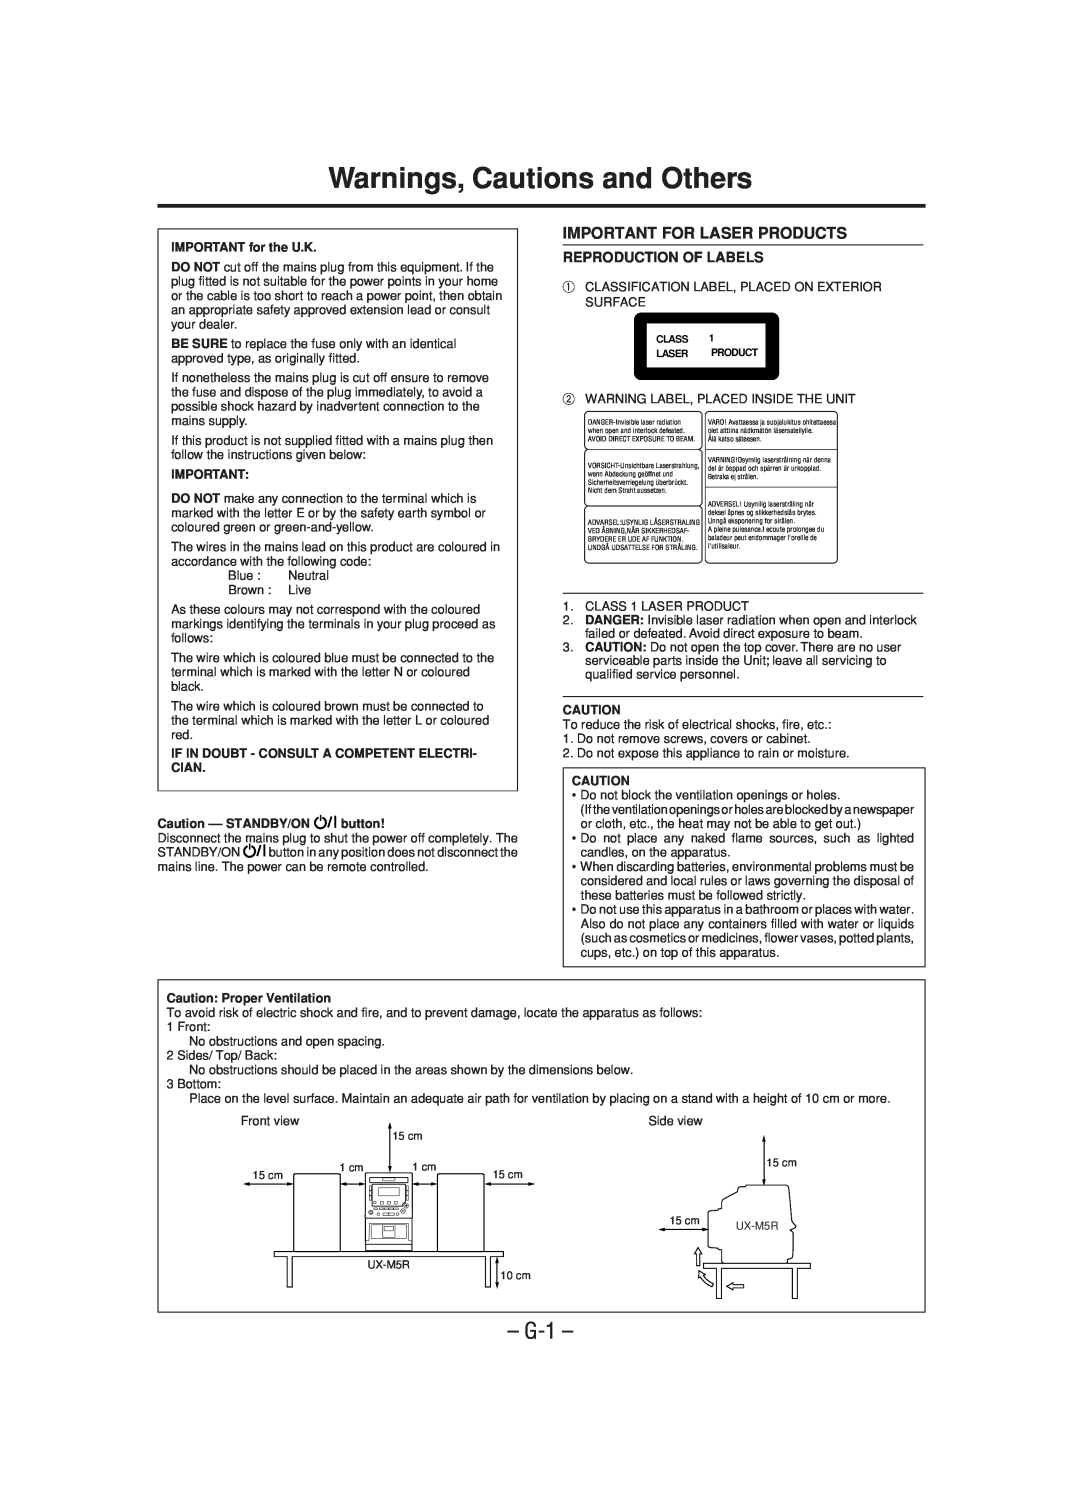 JVC LVT0862-001B manual Warnings, Cautions and Others, G-1, Important For Laser Products, Reproduction Of Labels 